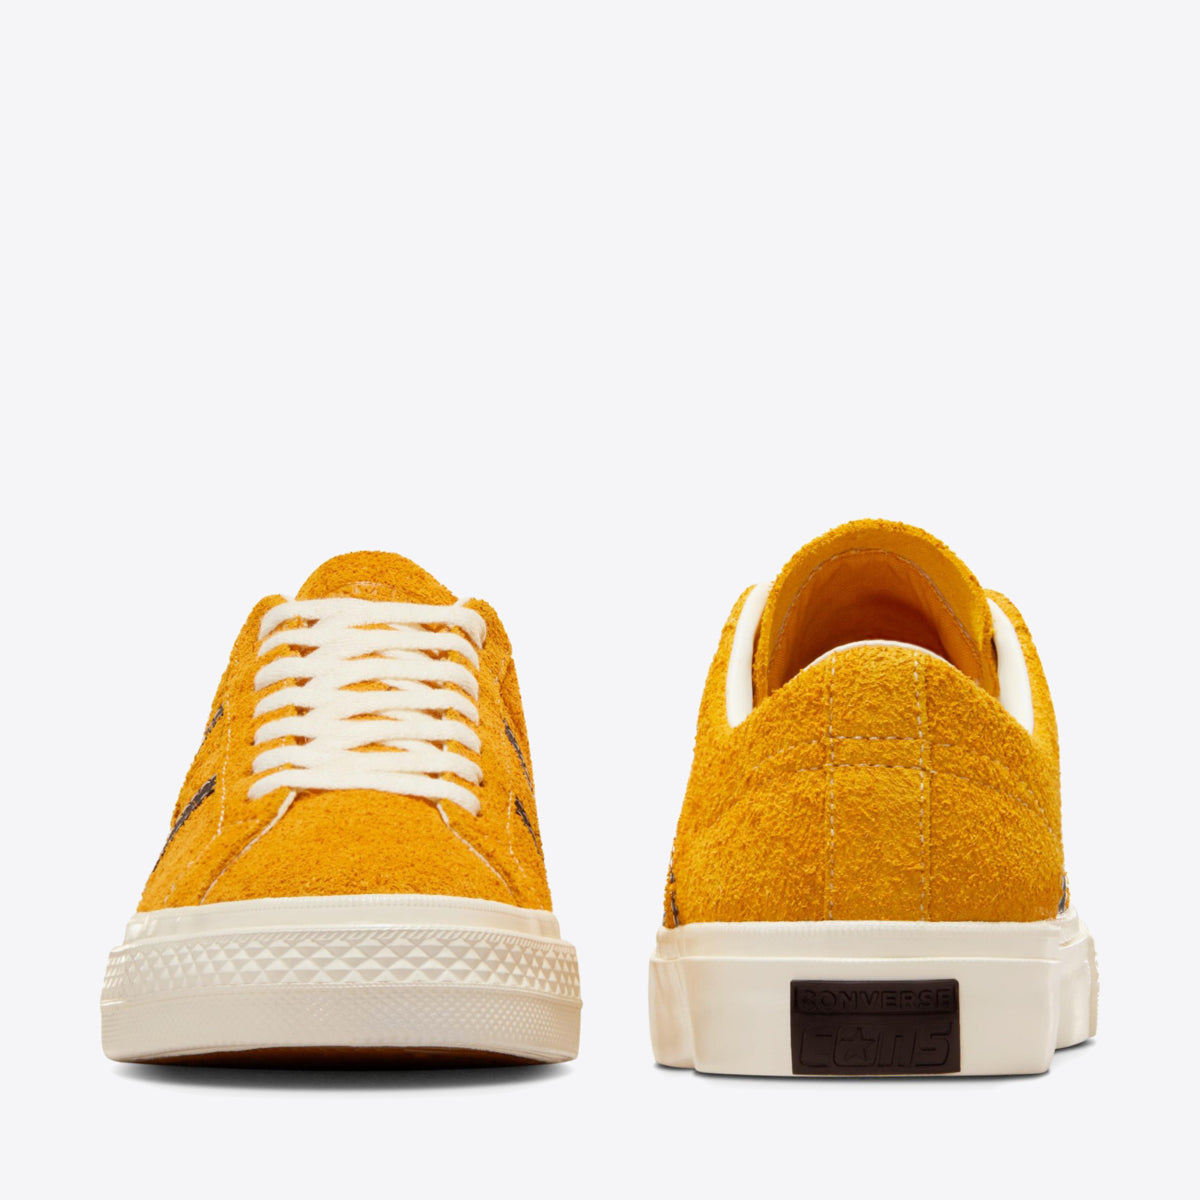 CONVERSE One Star Academy Pro Low Sunflower Gold/Black - Image 6